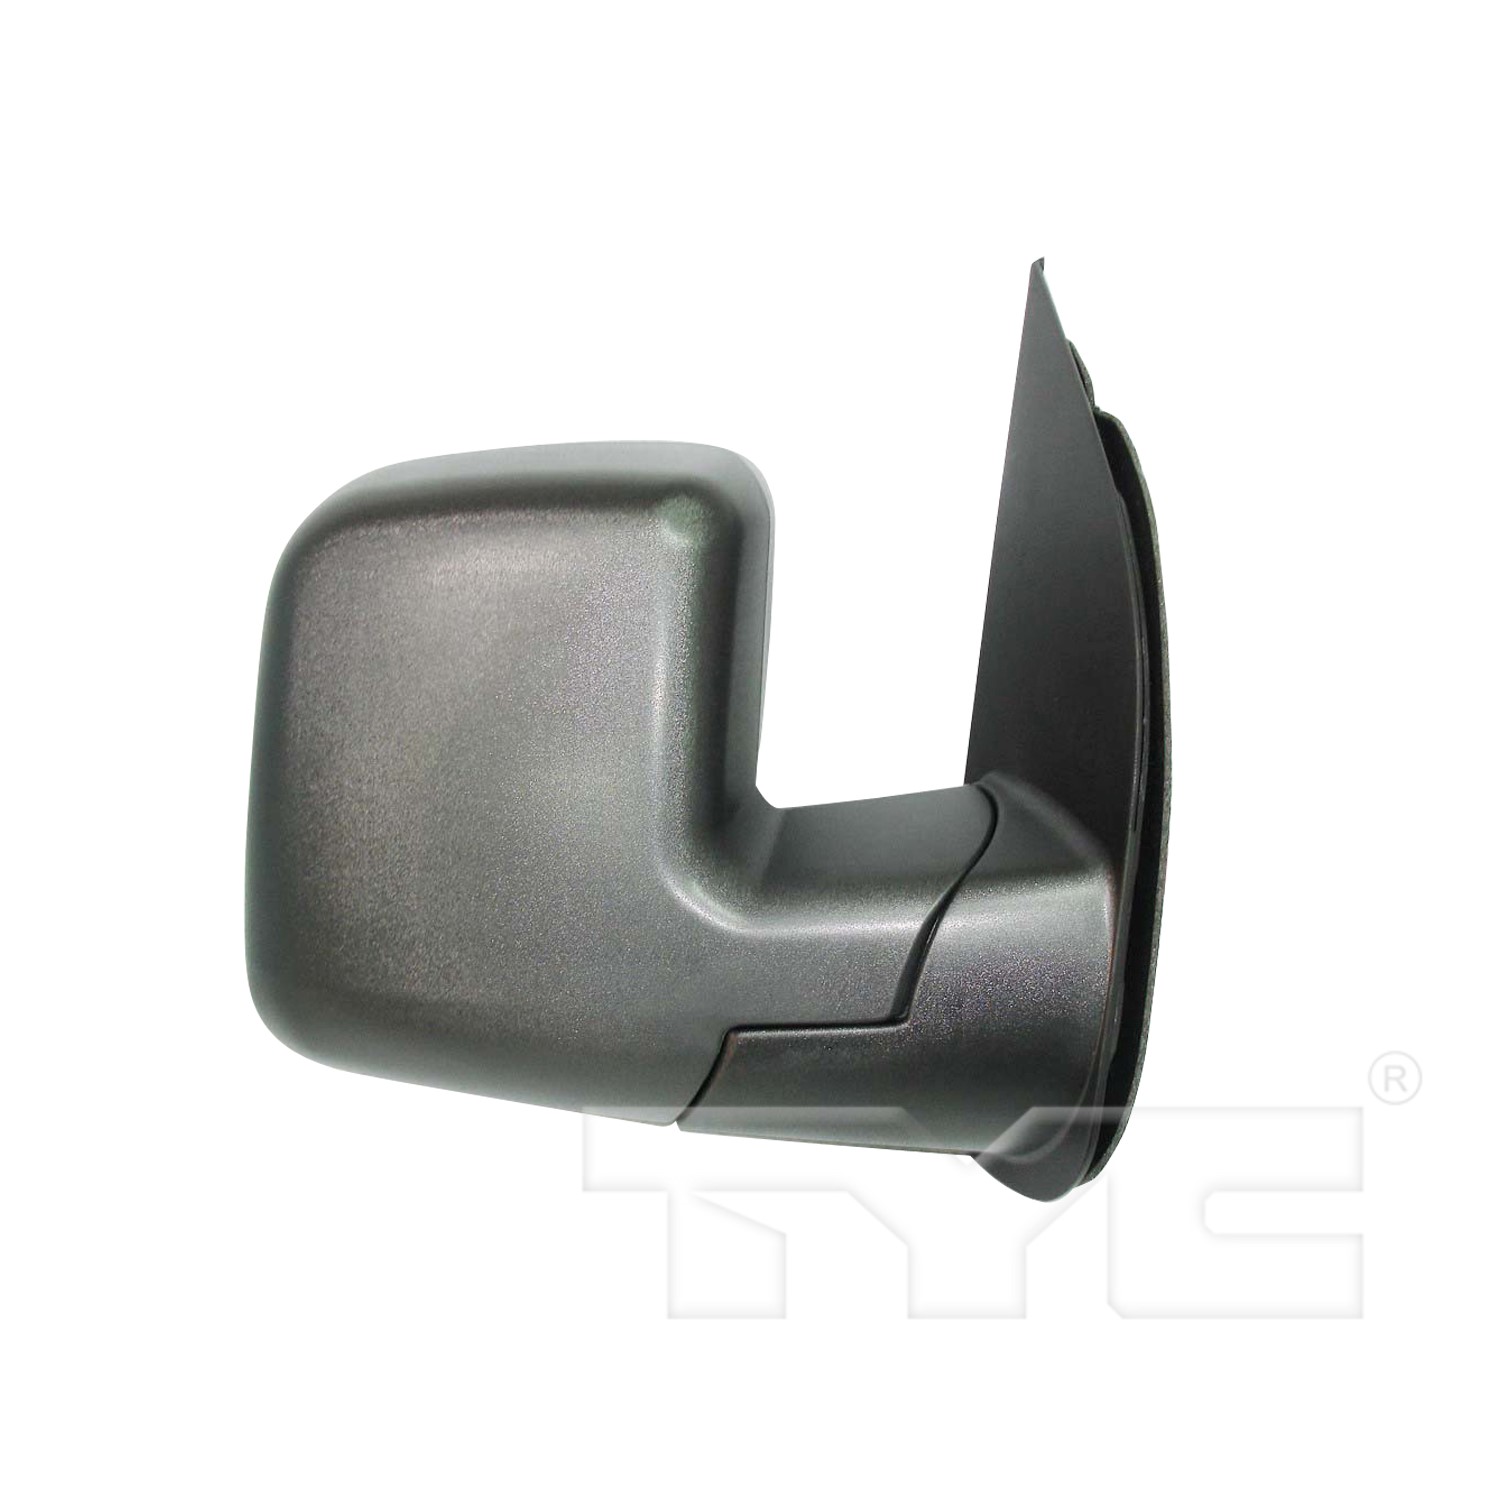 Aftermarket MIRRORS for FORD - E-150 ECONOLINE CLUB WAGON, E-150 ECONOLINE CLUB WAGON,02-02,RT Mirror outside rear view